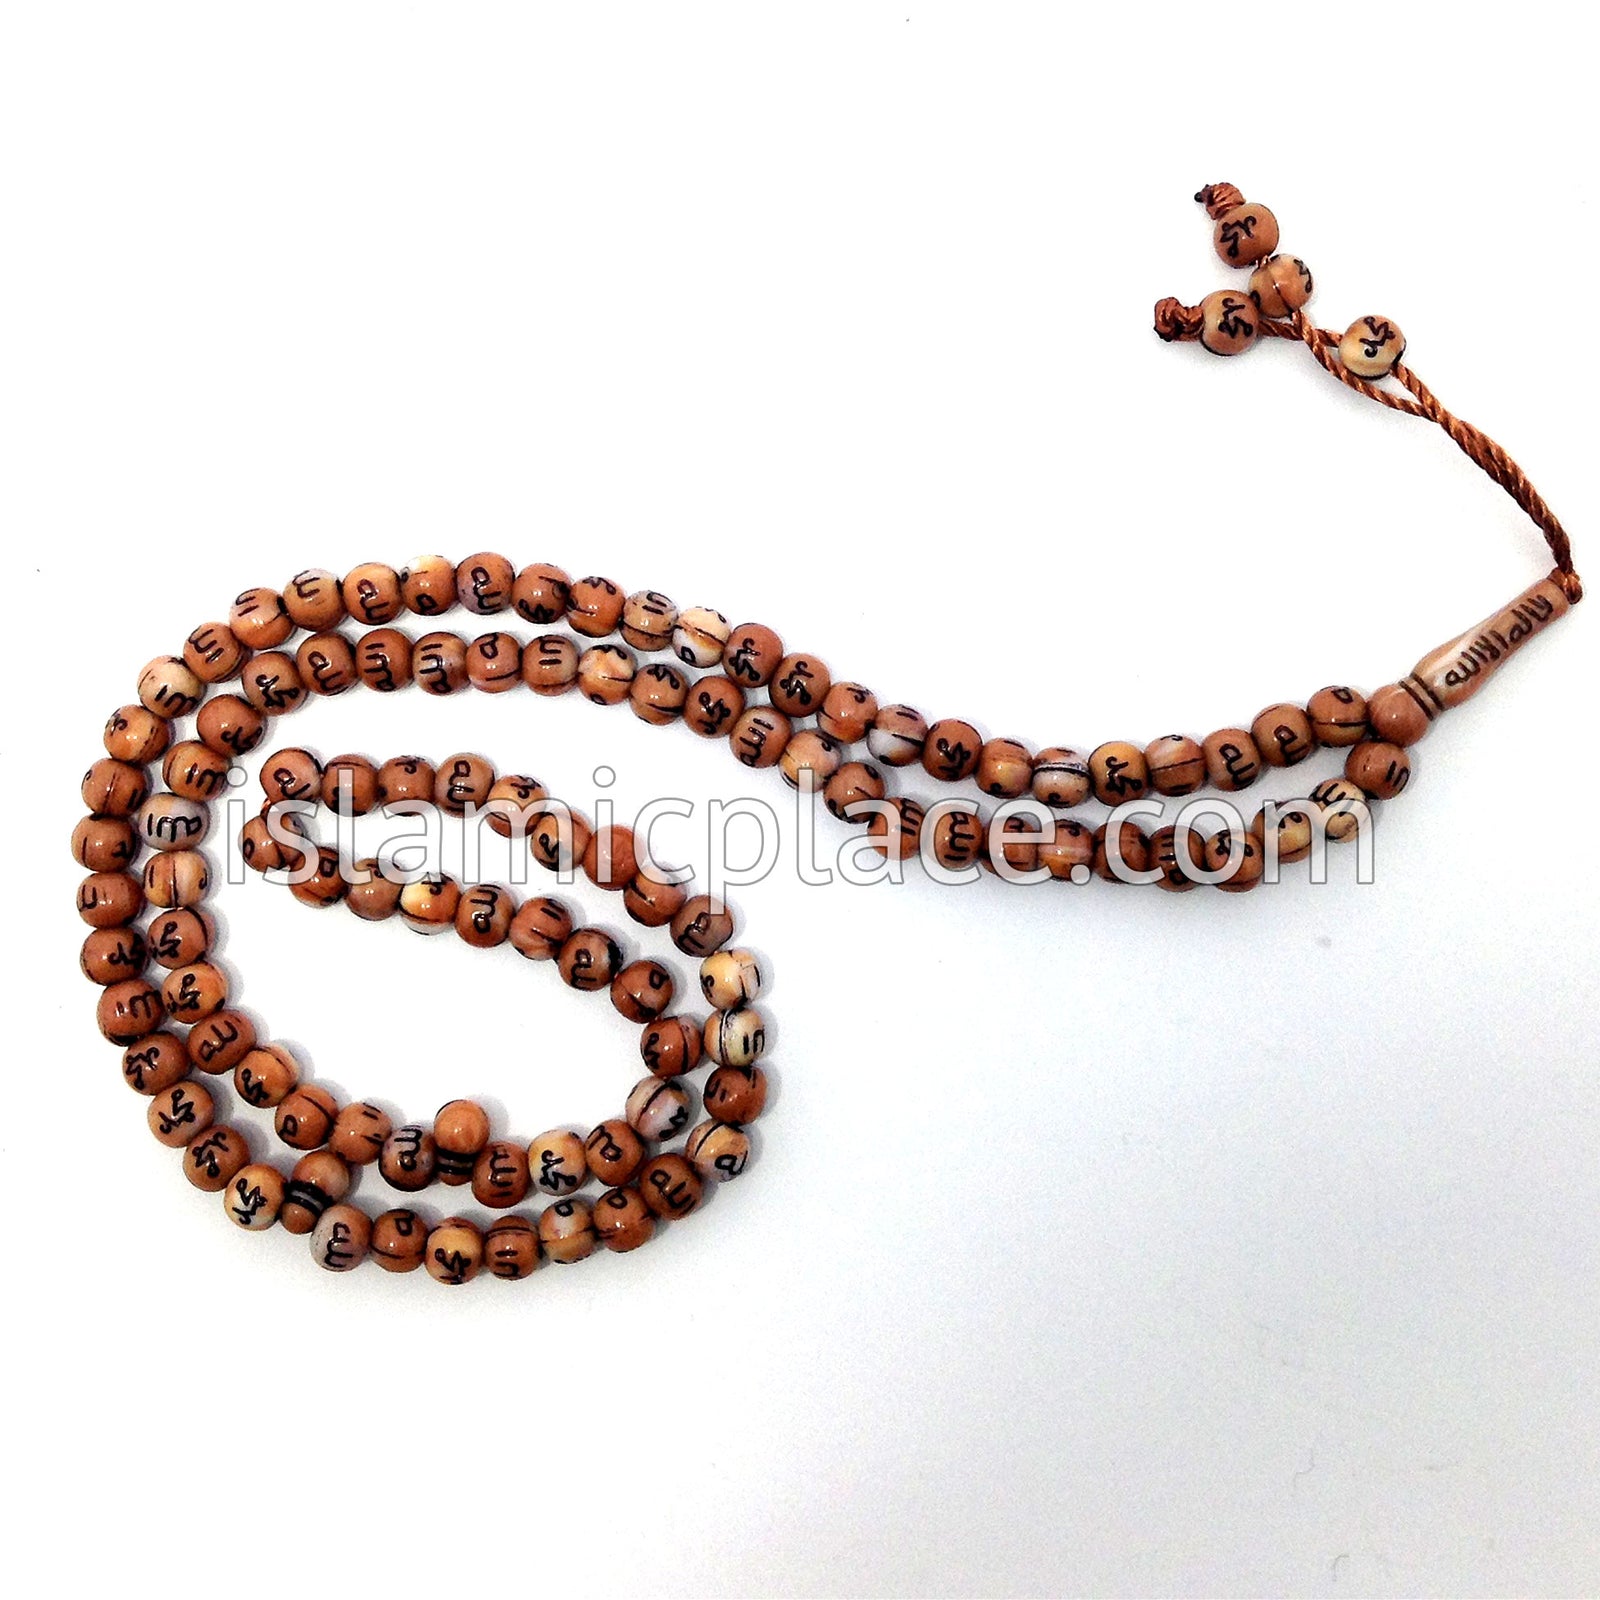 Black and Silver - Large Bead Tasbih Prayer Beads with Allah & Muhamma -  The Islamic Place